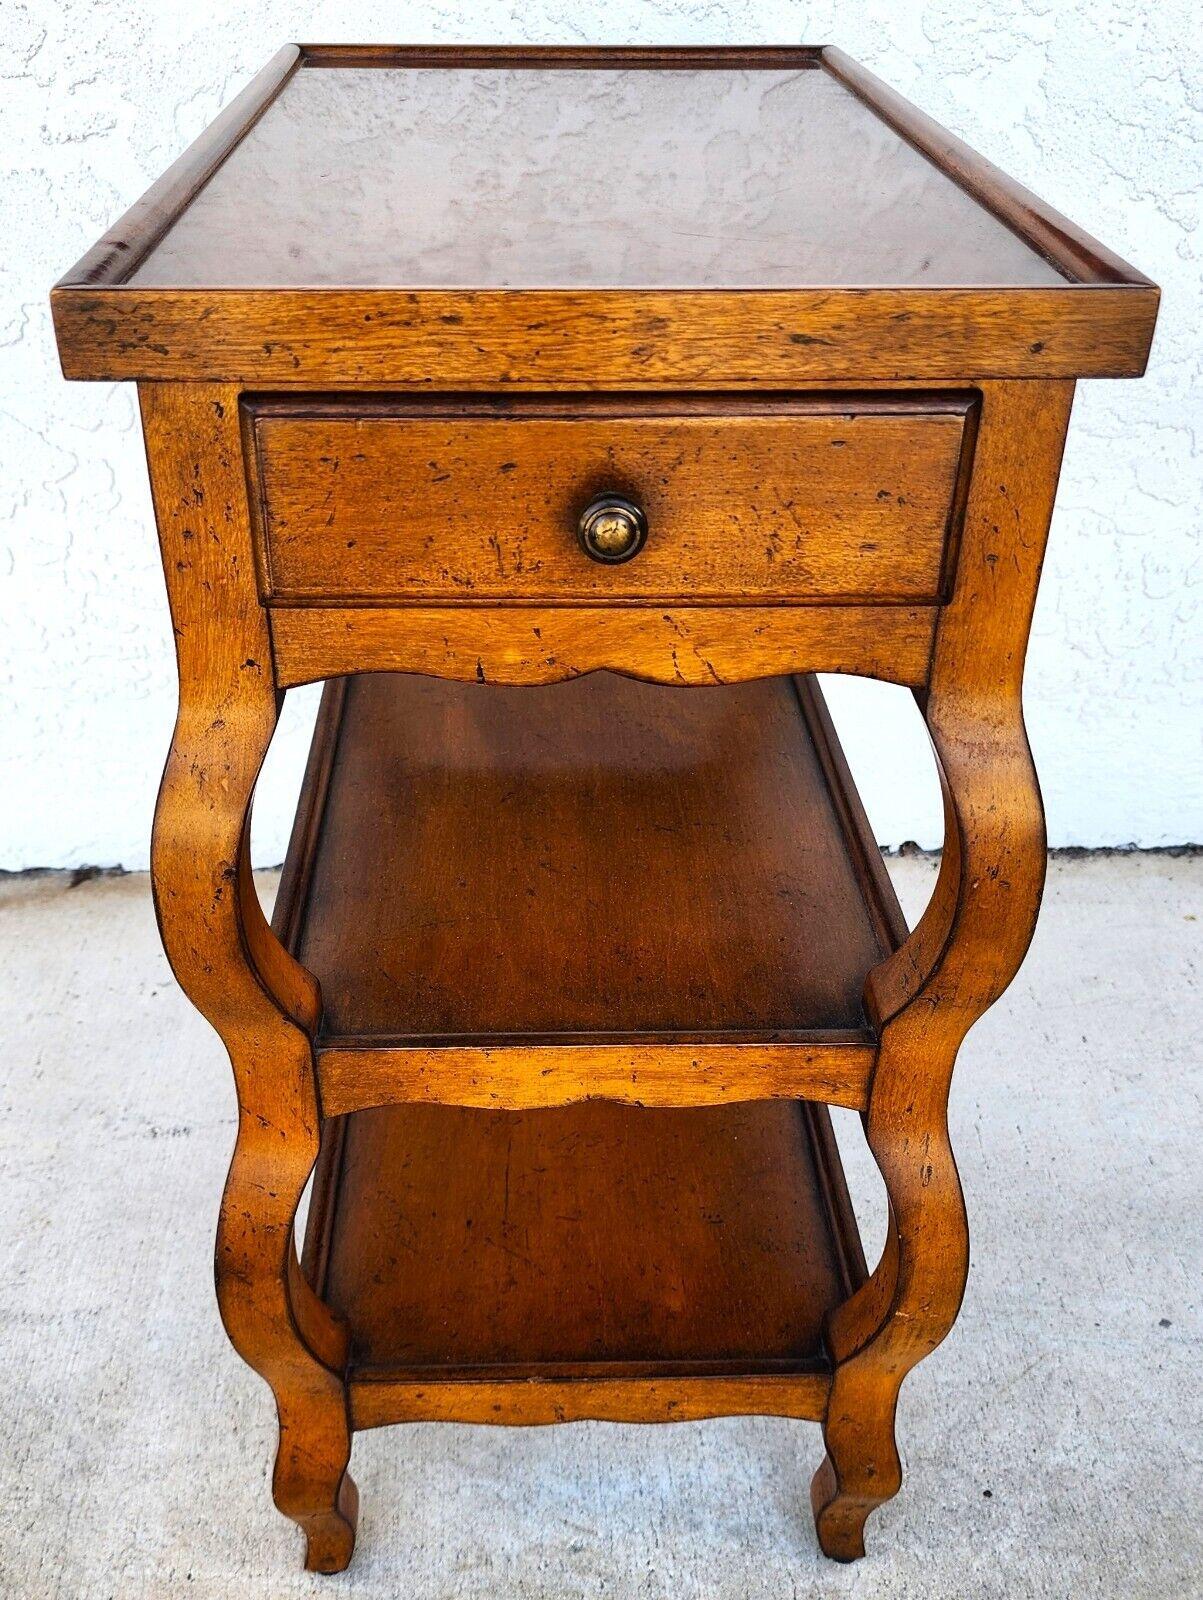 For FULL item description click on CONTINUE READING at the bottom of this page.

Offering One Of Our Recent Palm Beach Estate Fine Furniture Acquisitions Of An
Italian Style Center End Side Table 3-Tier in Solid Distressed Fruitwood with 1 Drawer by